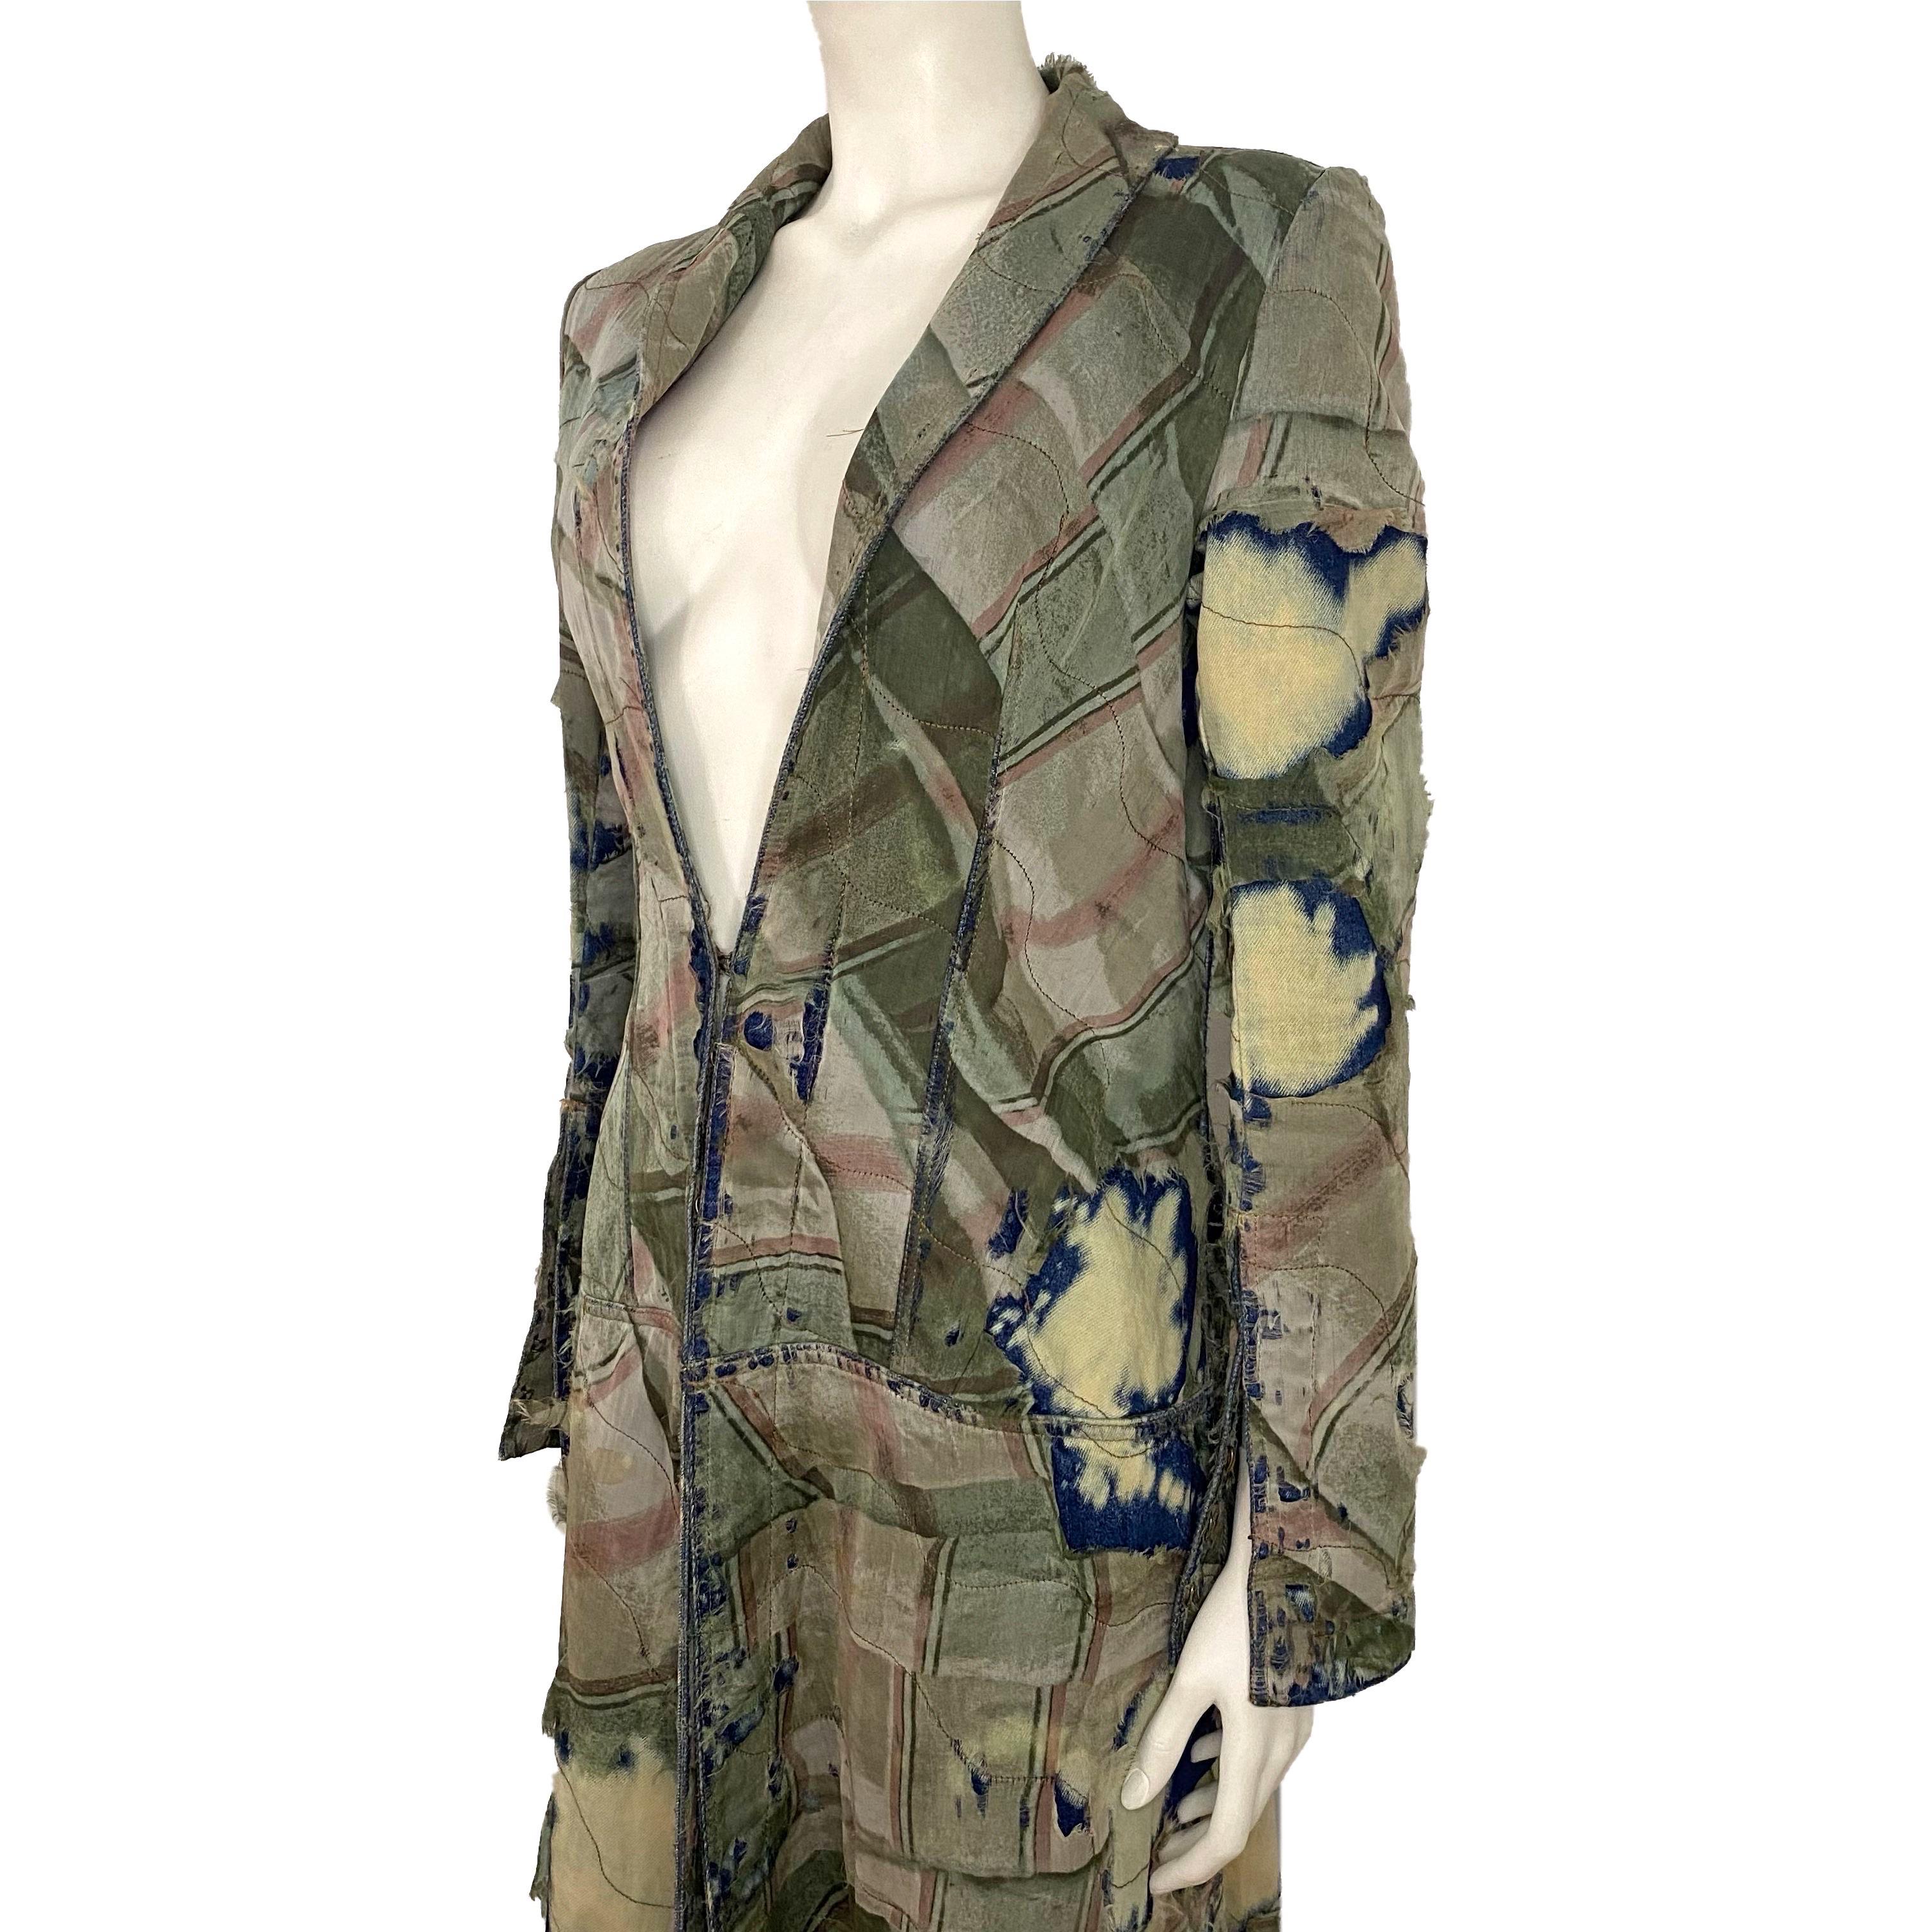 Roberto Cavalli long bleached denim coat with distressed green silk outer layer from the Fall/Winter 2001 collection (seen on both campaign and runway show). Corset structured, front hook closure, open sleeves (with hooks).

Size M

Shoulder to